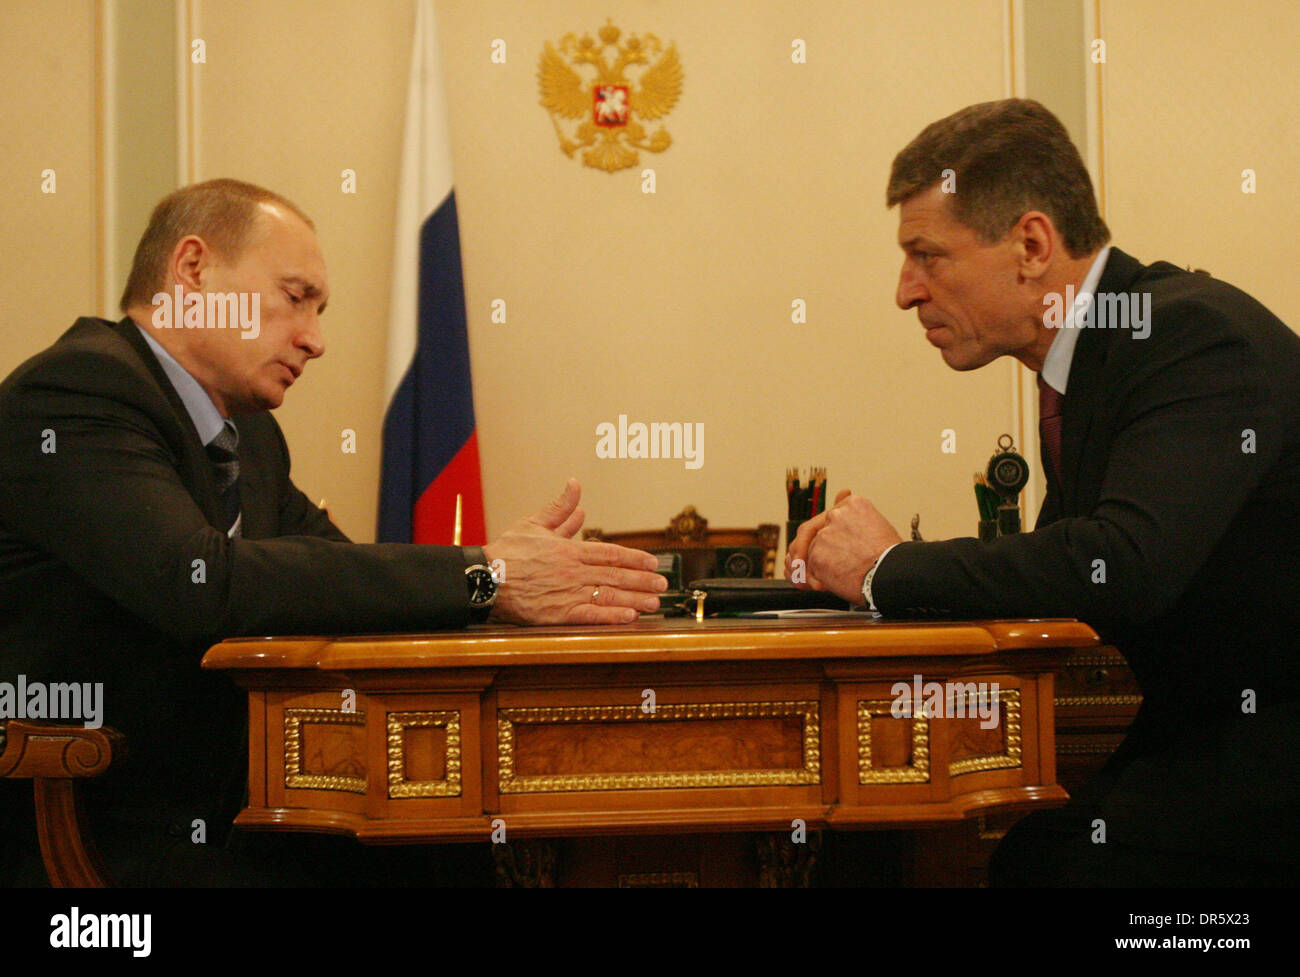 Dec 23, 2008 - Moscow, Russia - Prime-minister of Russia VLADIMIR PUTIN (L) at the meeting with his deputy DMITRY KOZAK (R). Dmitry Kozak is known as a close ally of Vladimir Putin and one of the key figures in the presidential team. (Credit Image: © PhotoXpress/ZUMA Press) RESTRICTIONS: * North and South America Rights Only * Stock Photo